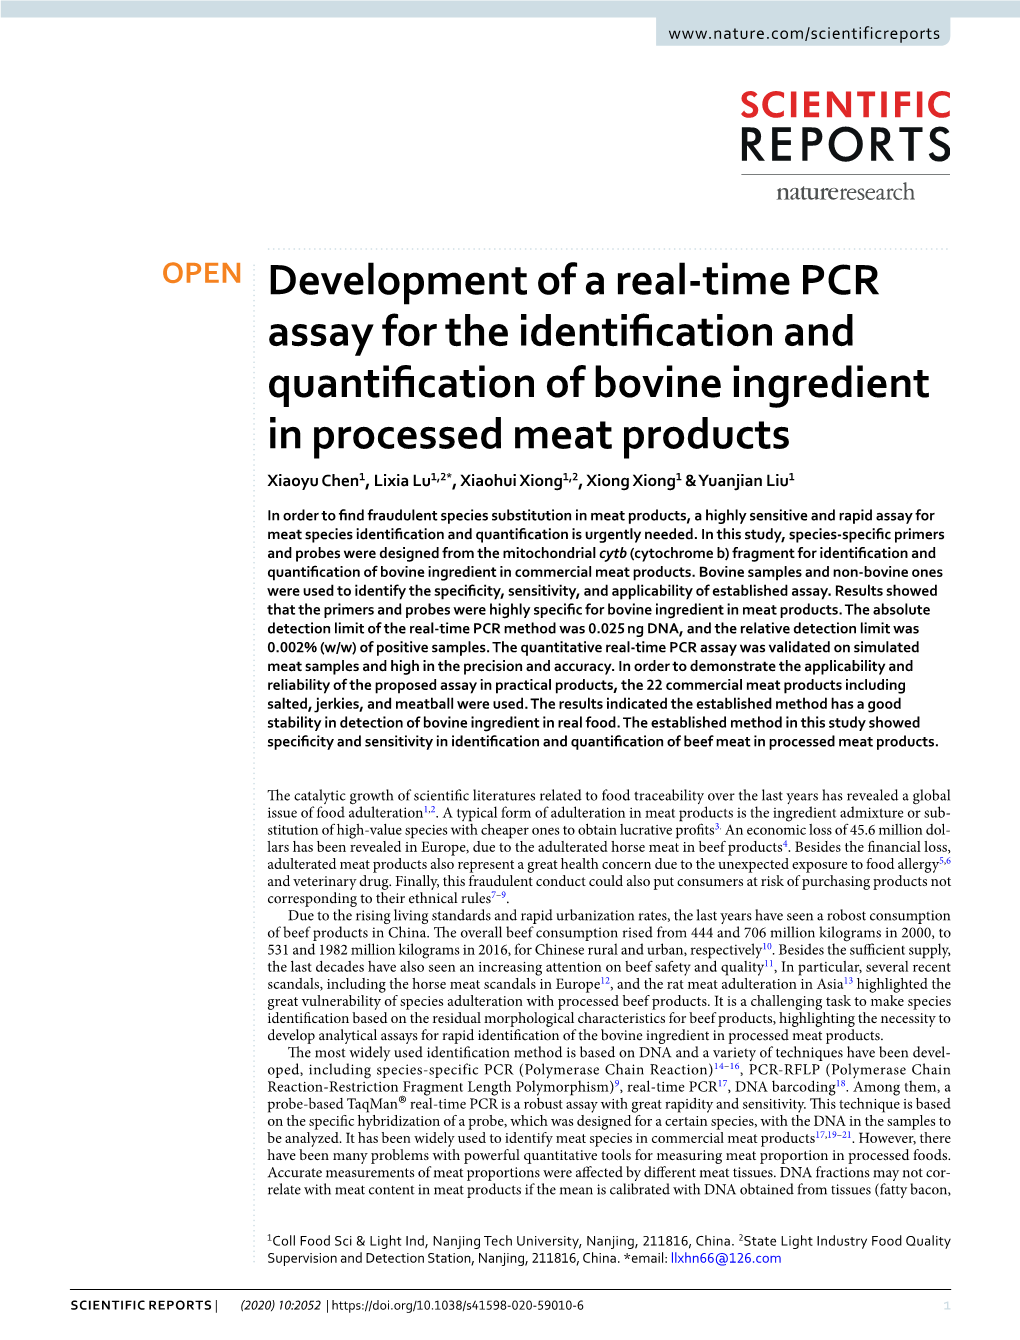 Development of a Real-Time PCR Assay for the Identification